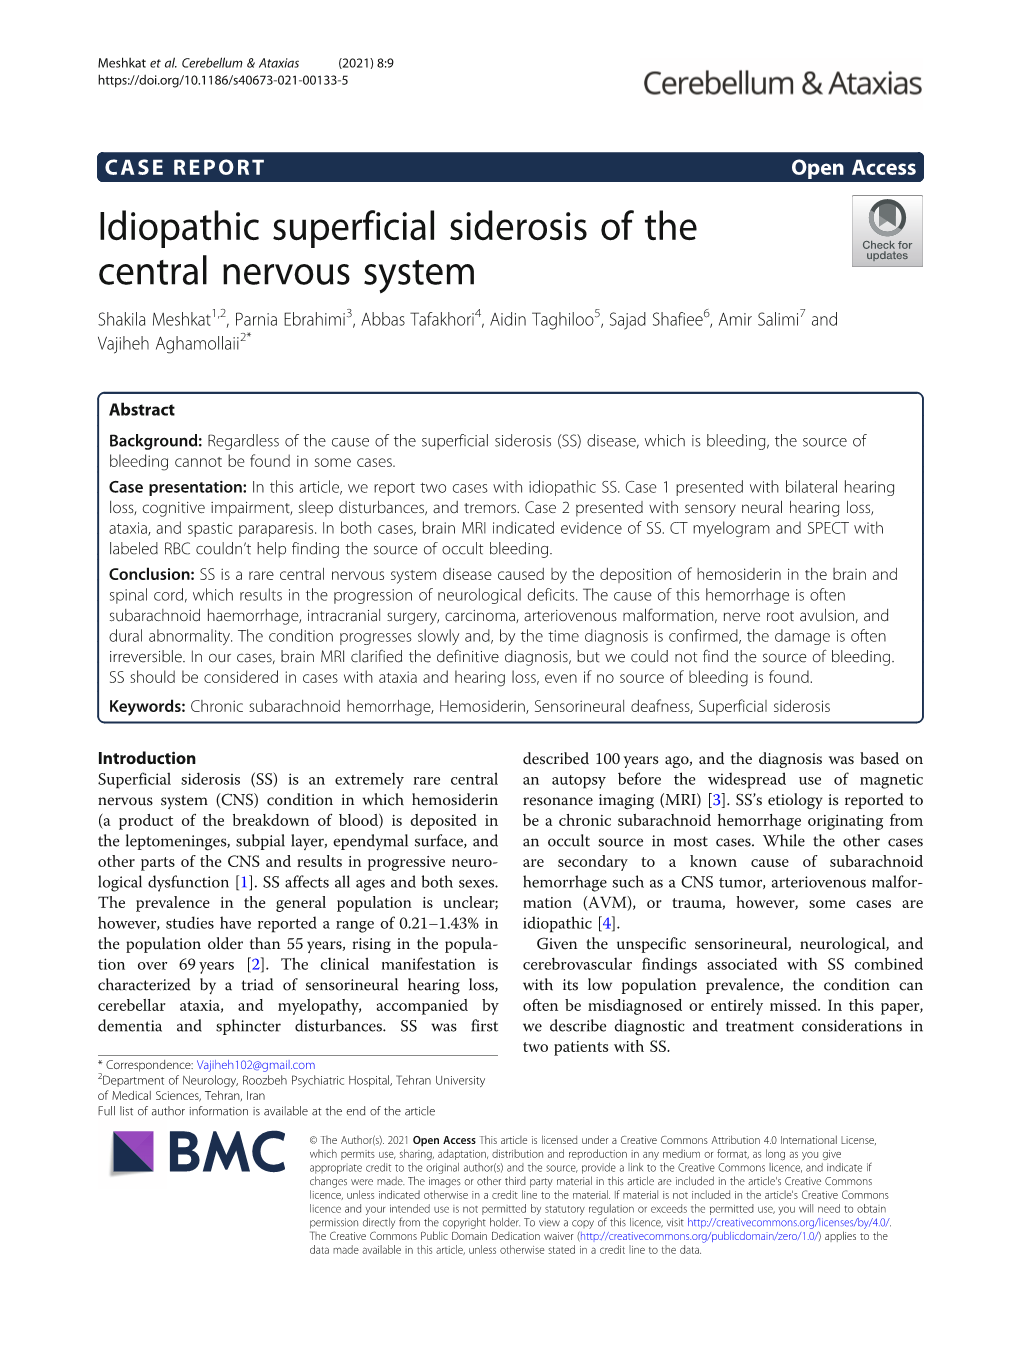 Idiopathic Superficial Siderosis of the Central Nervous System